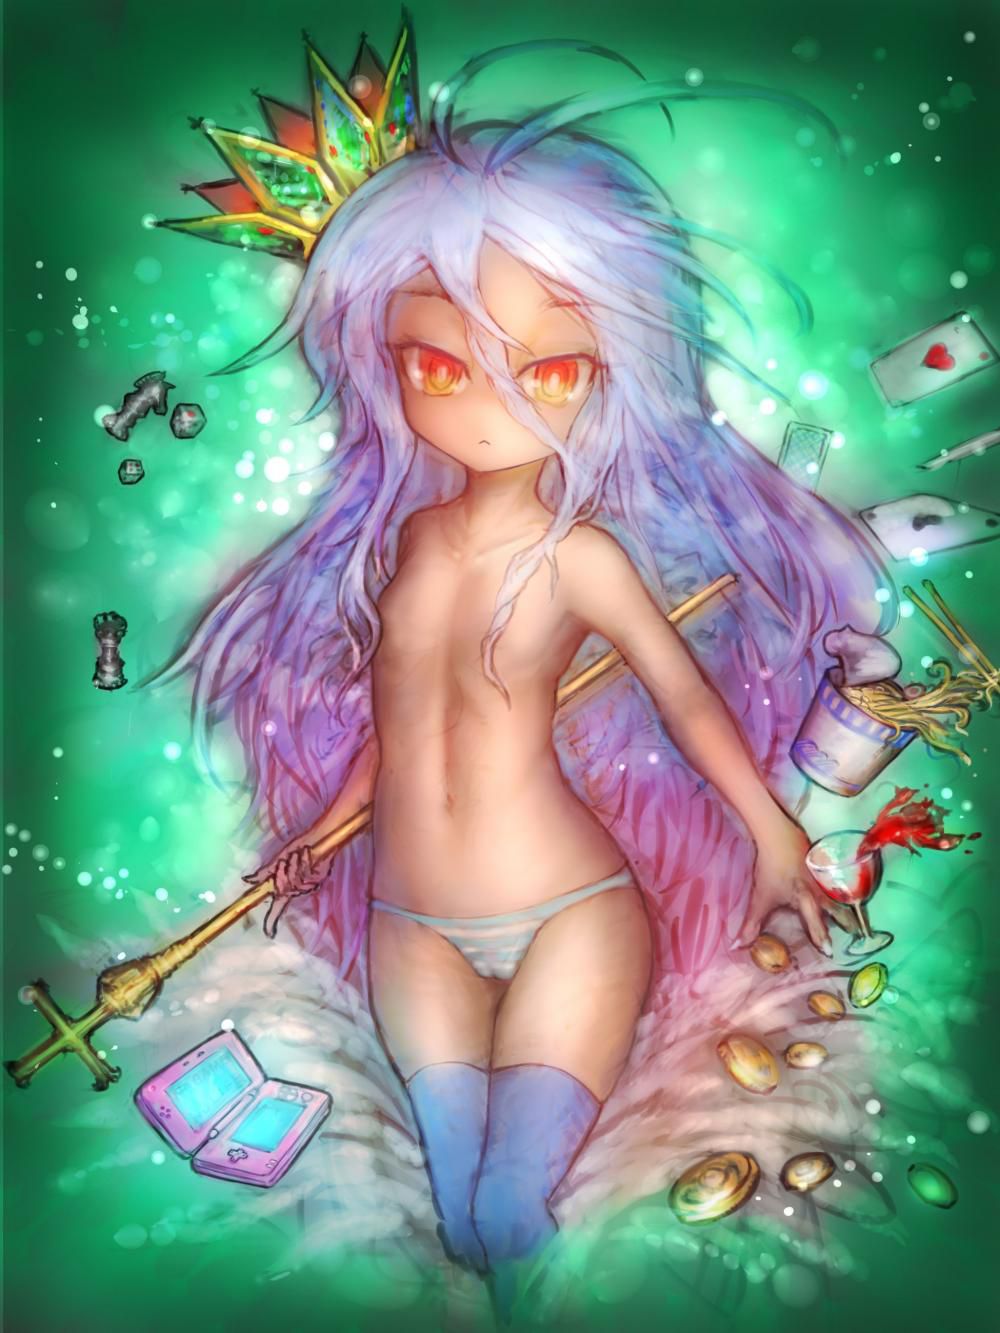 Play nolife white erotic images 40 cards [No Game No Life] 39